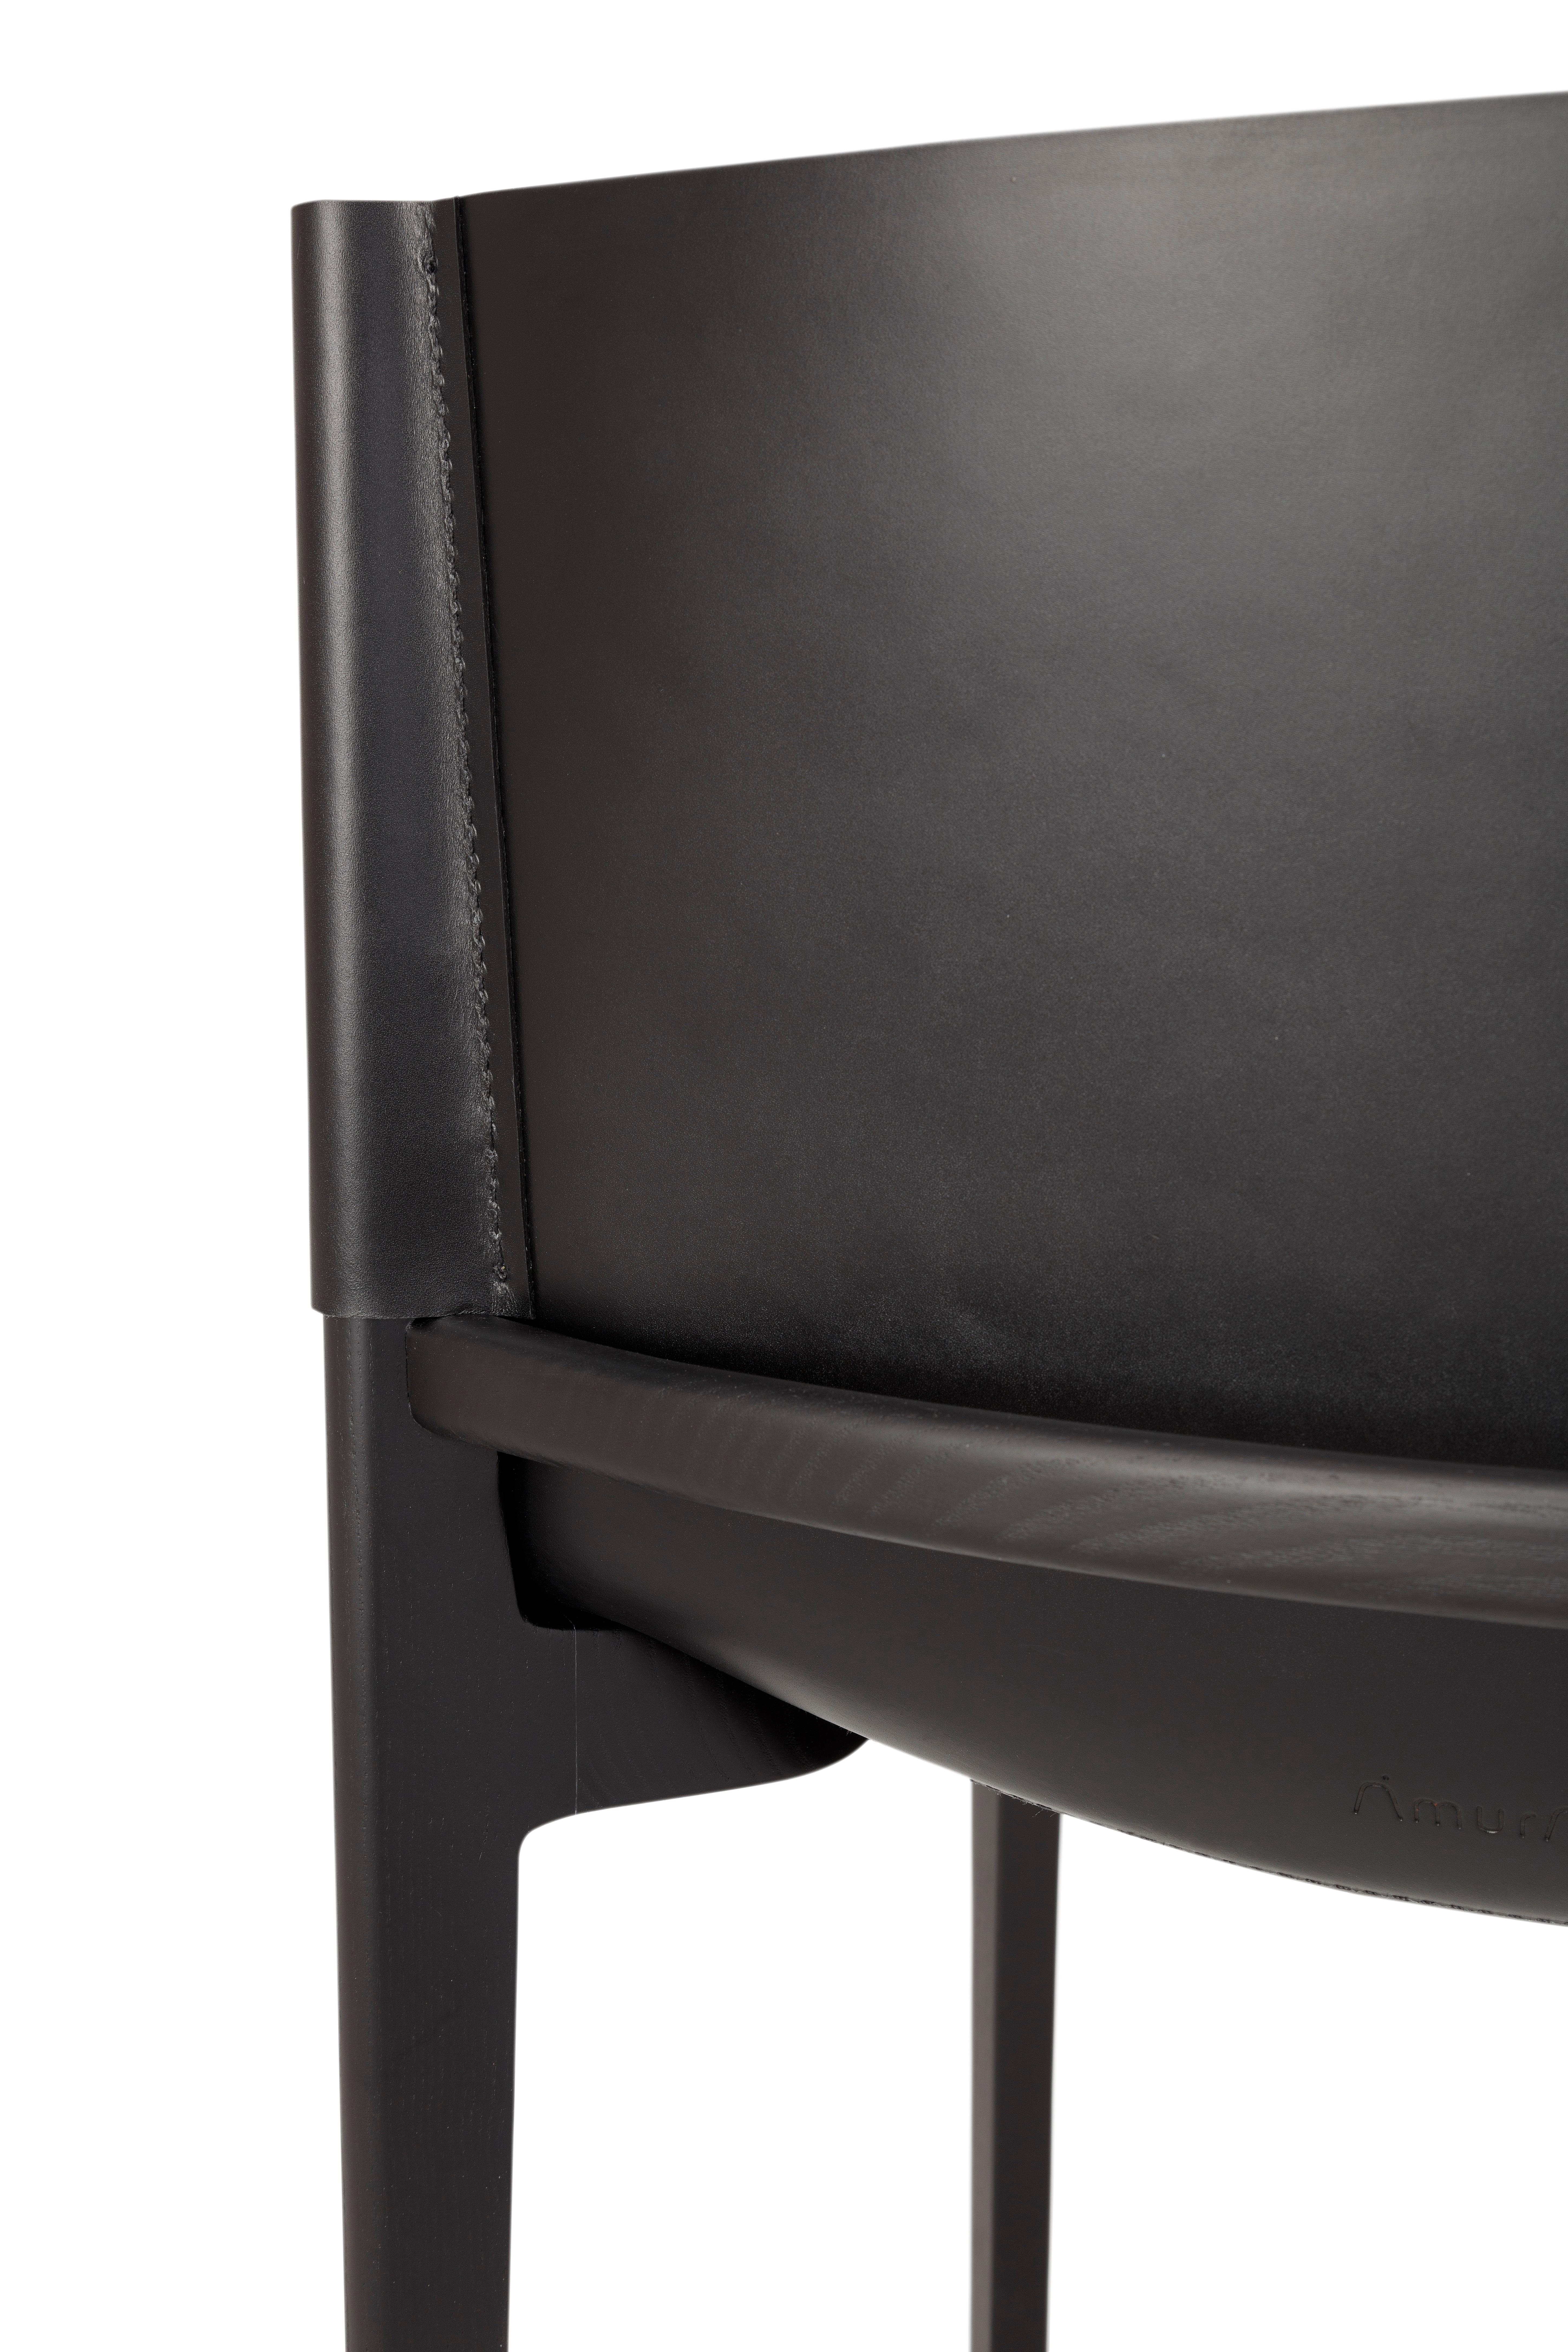 Contemporary Wooden Black Chair 'Stilt', Cuoio Leather For Sale 4